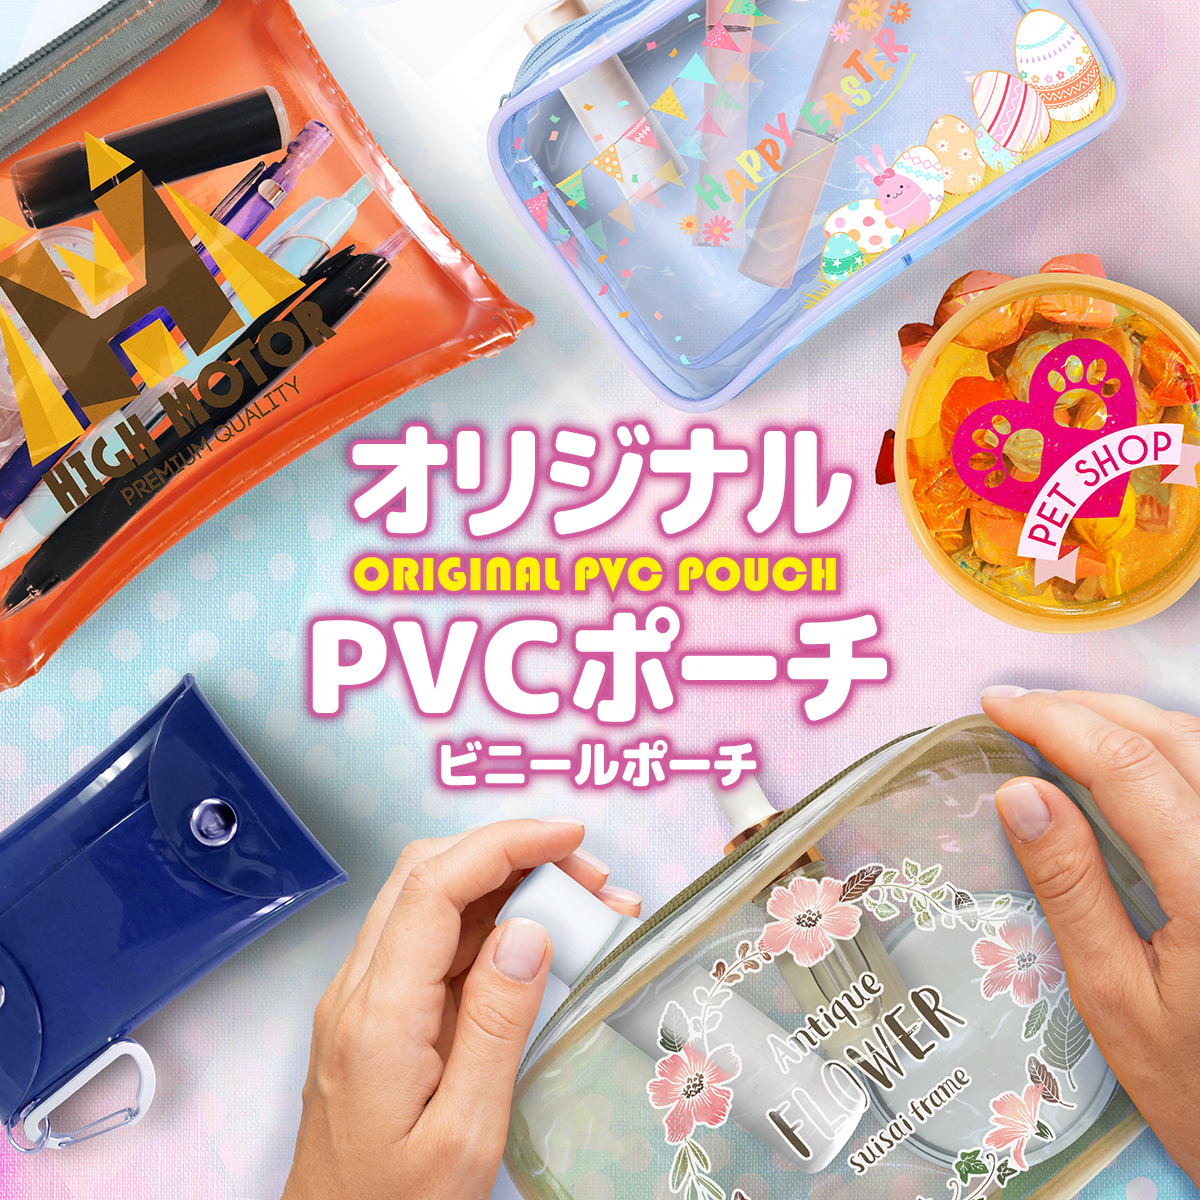 PVCポーチ（ビニールポーチ） | PVCポーチ（ビニールポーチ